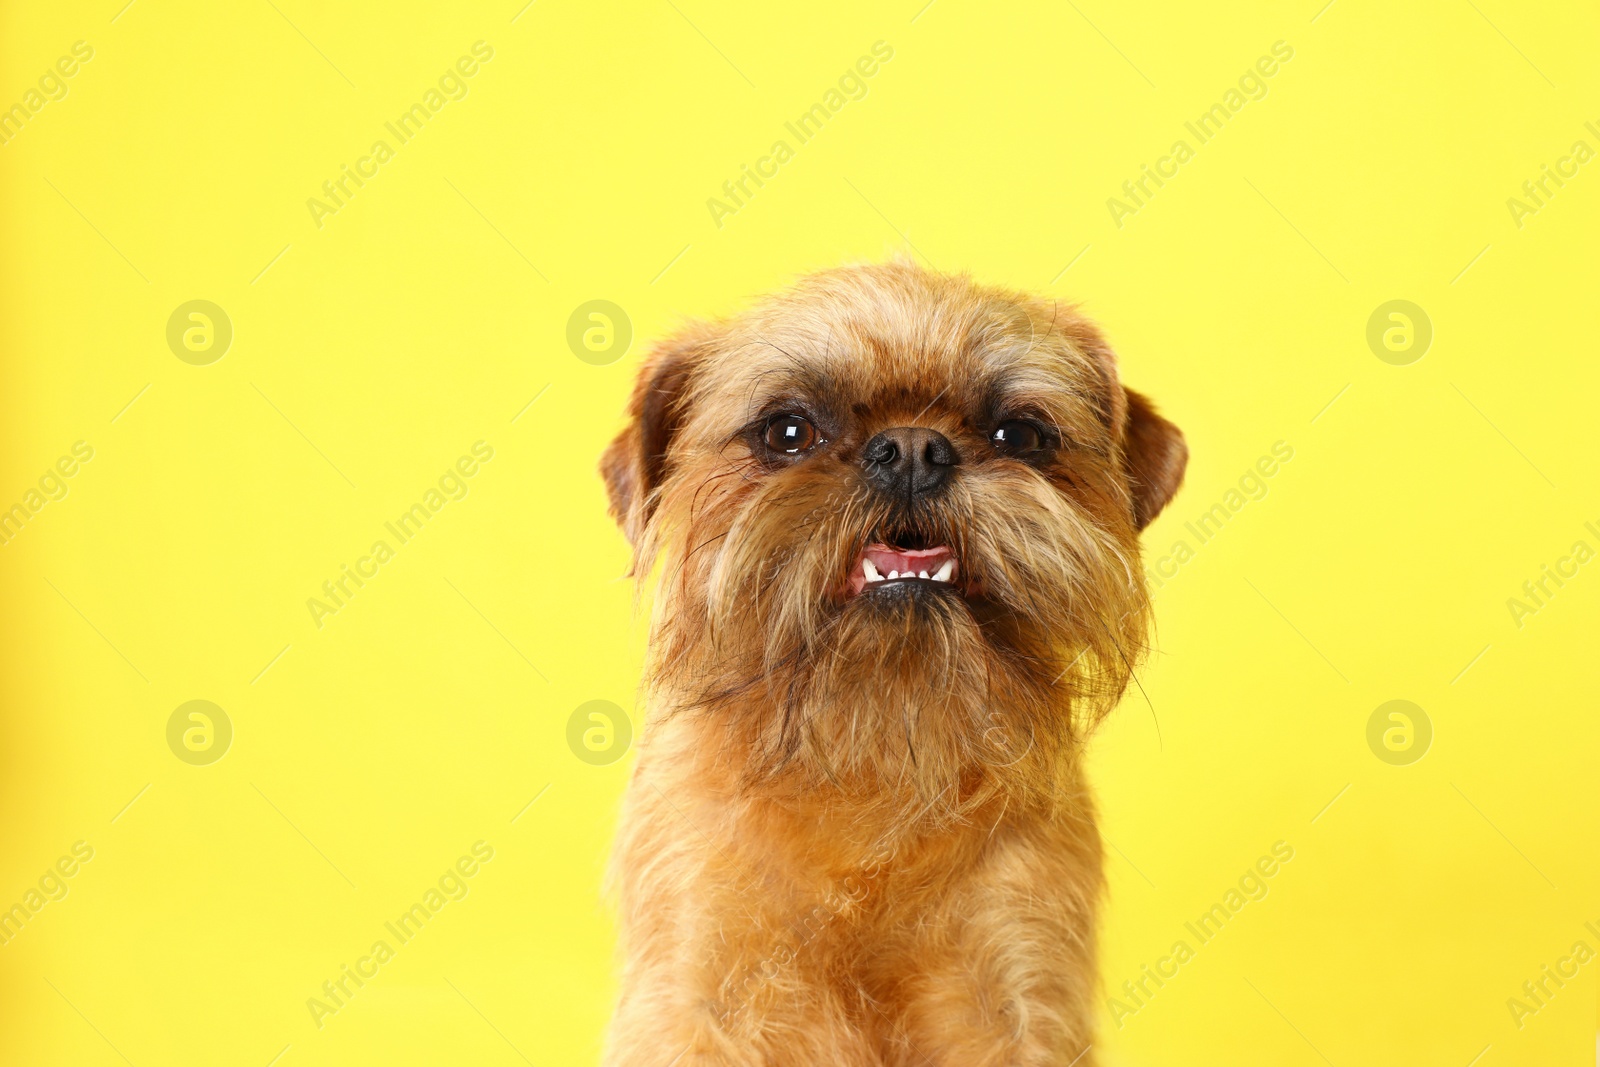 Photo of Studio portrait of funny Brussels Griffon dog looking into camera on color background